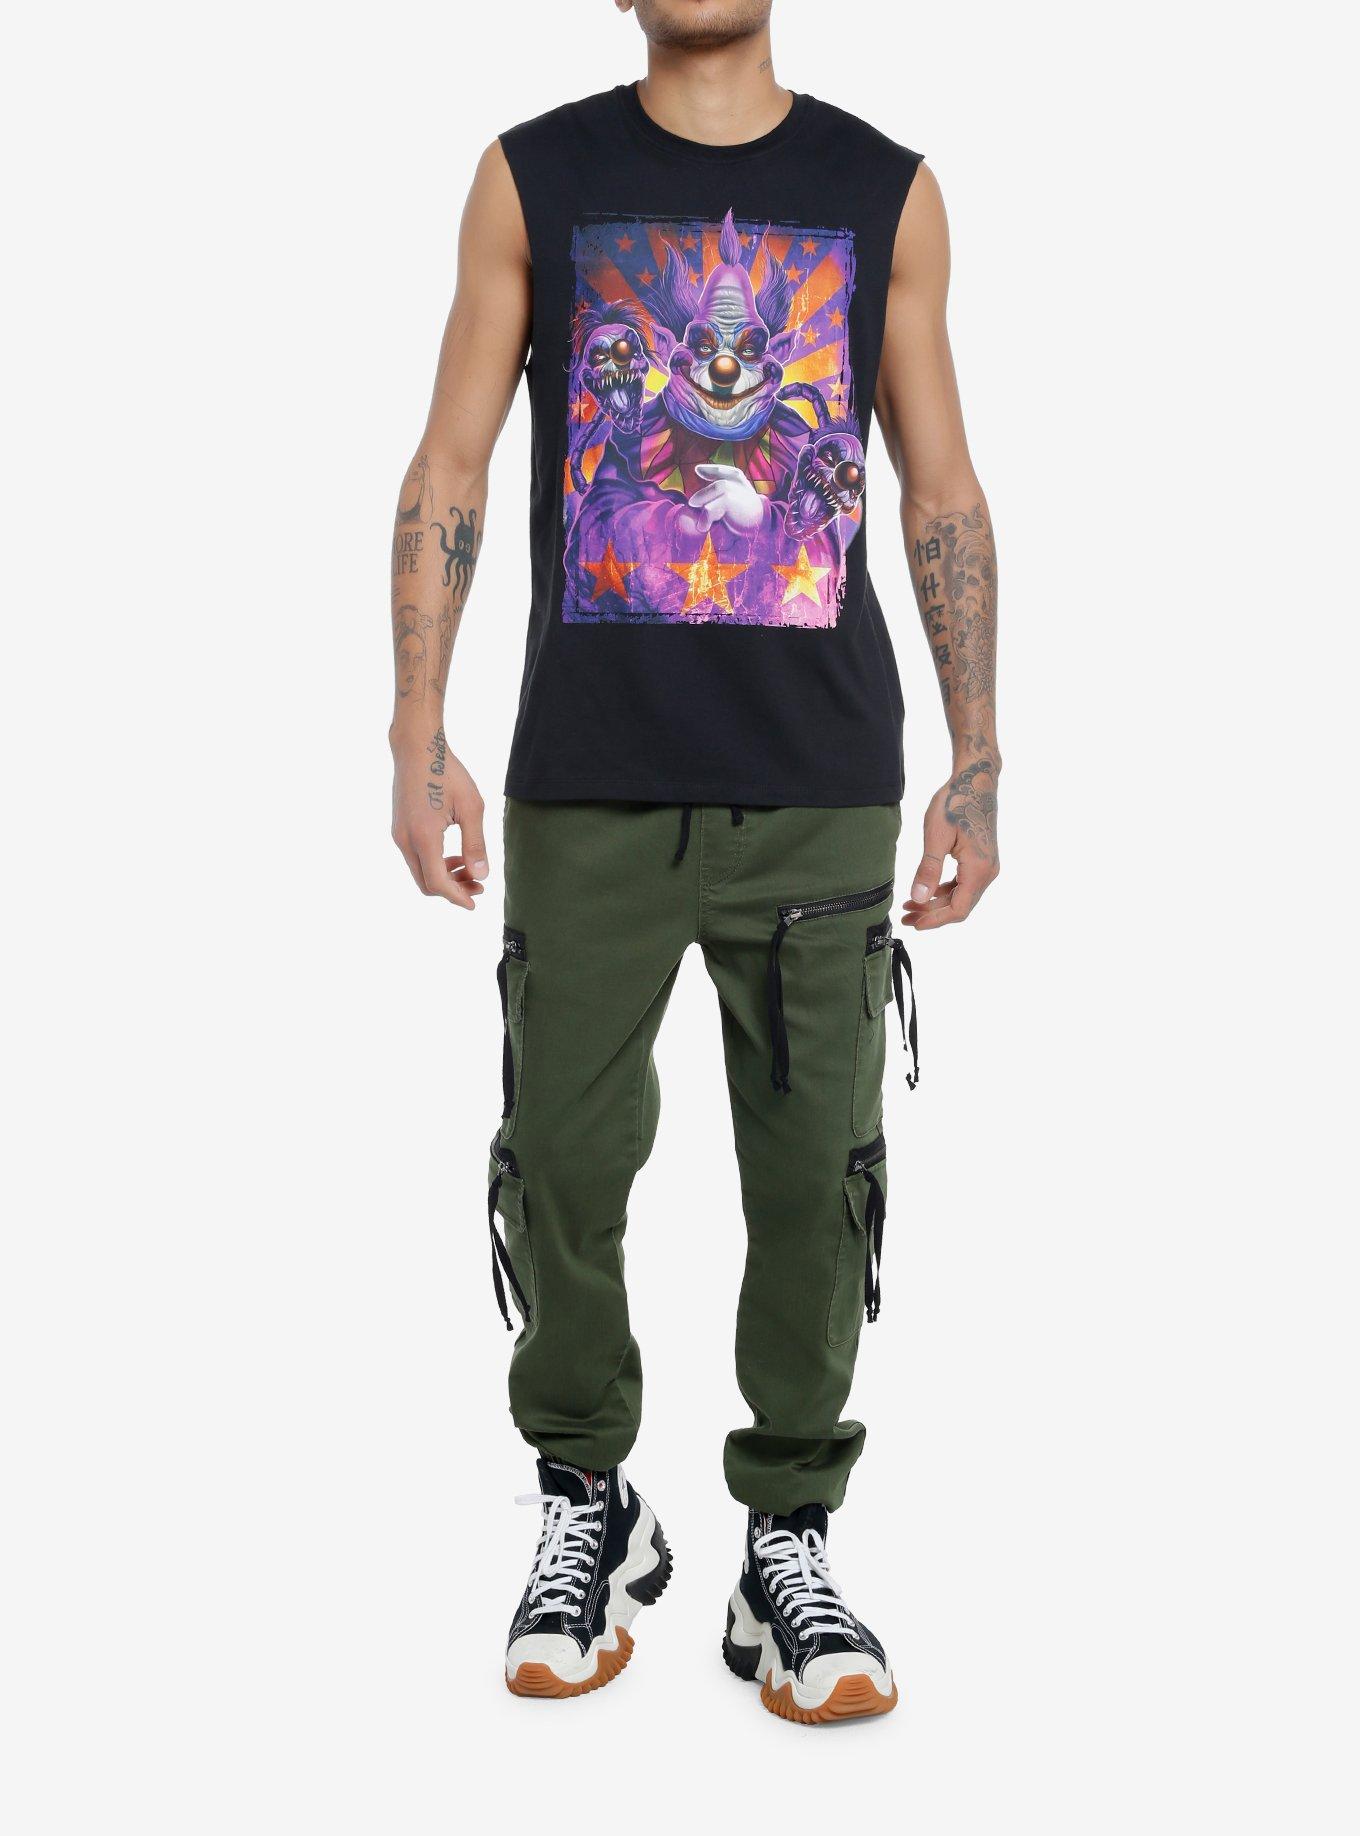 Killer Klowns From Outer Space Jumbo Muscle Tank Top